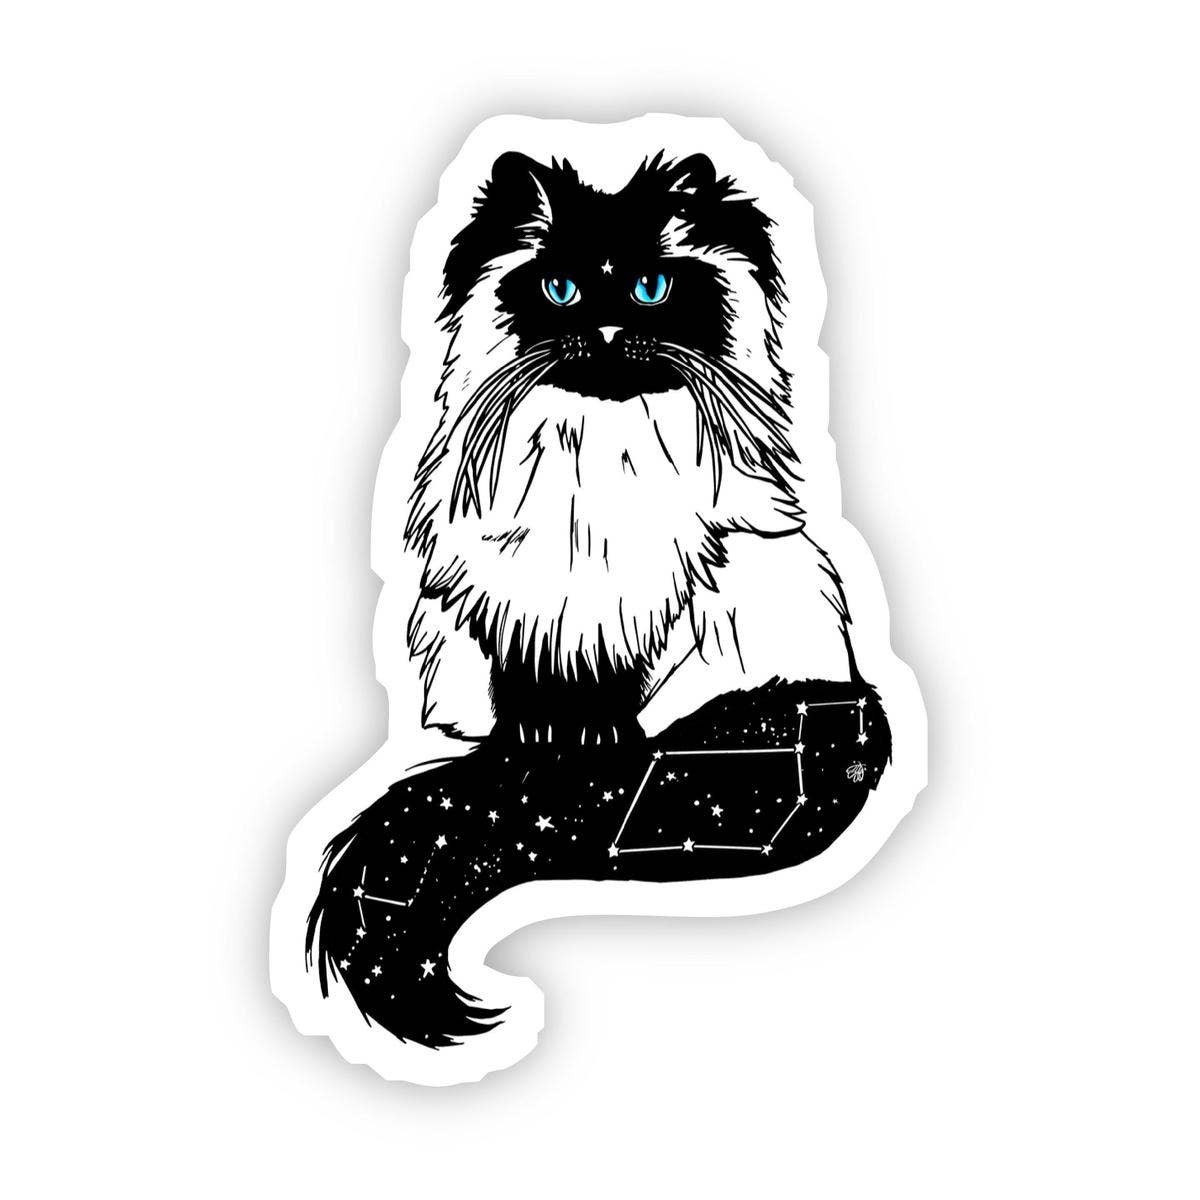 Sticker - White Cat With Blue Eyes